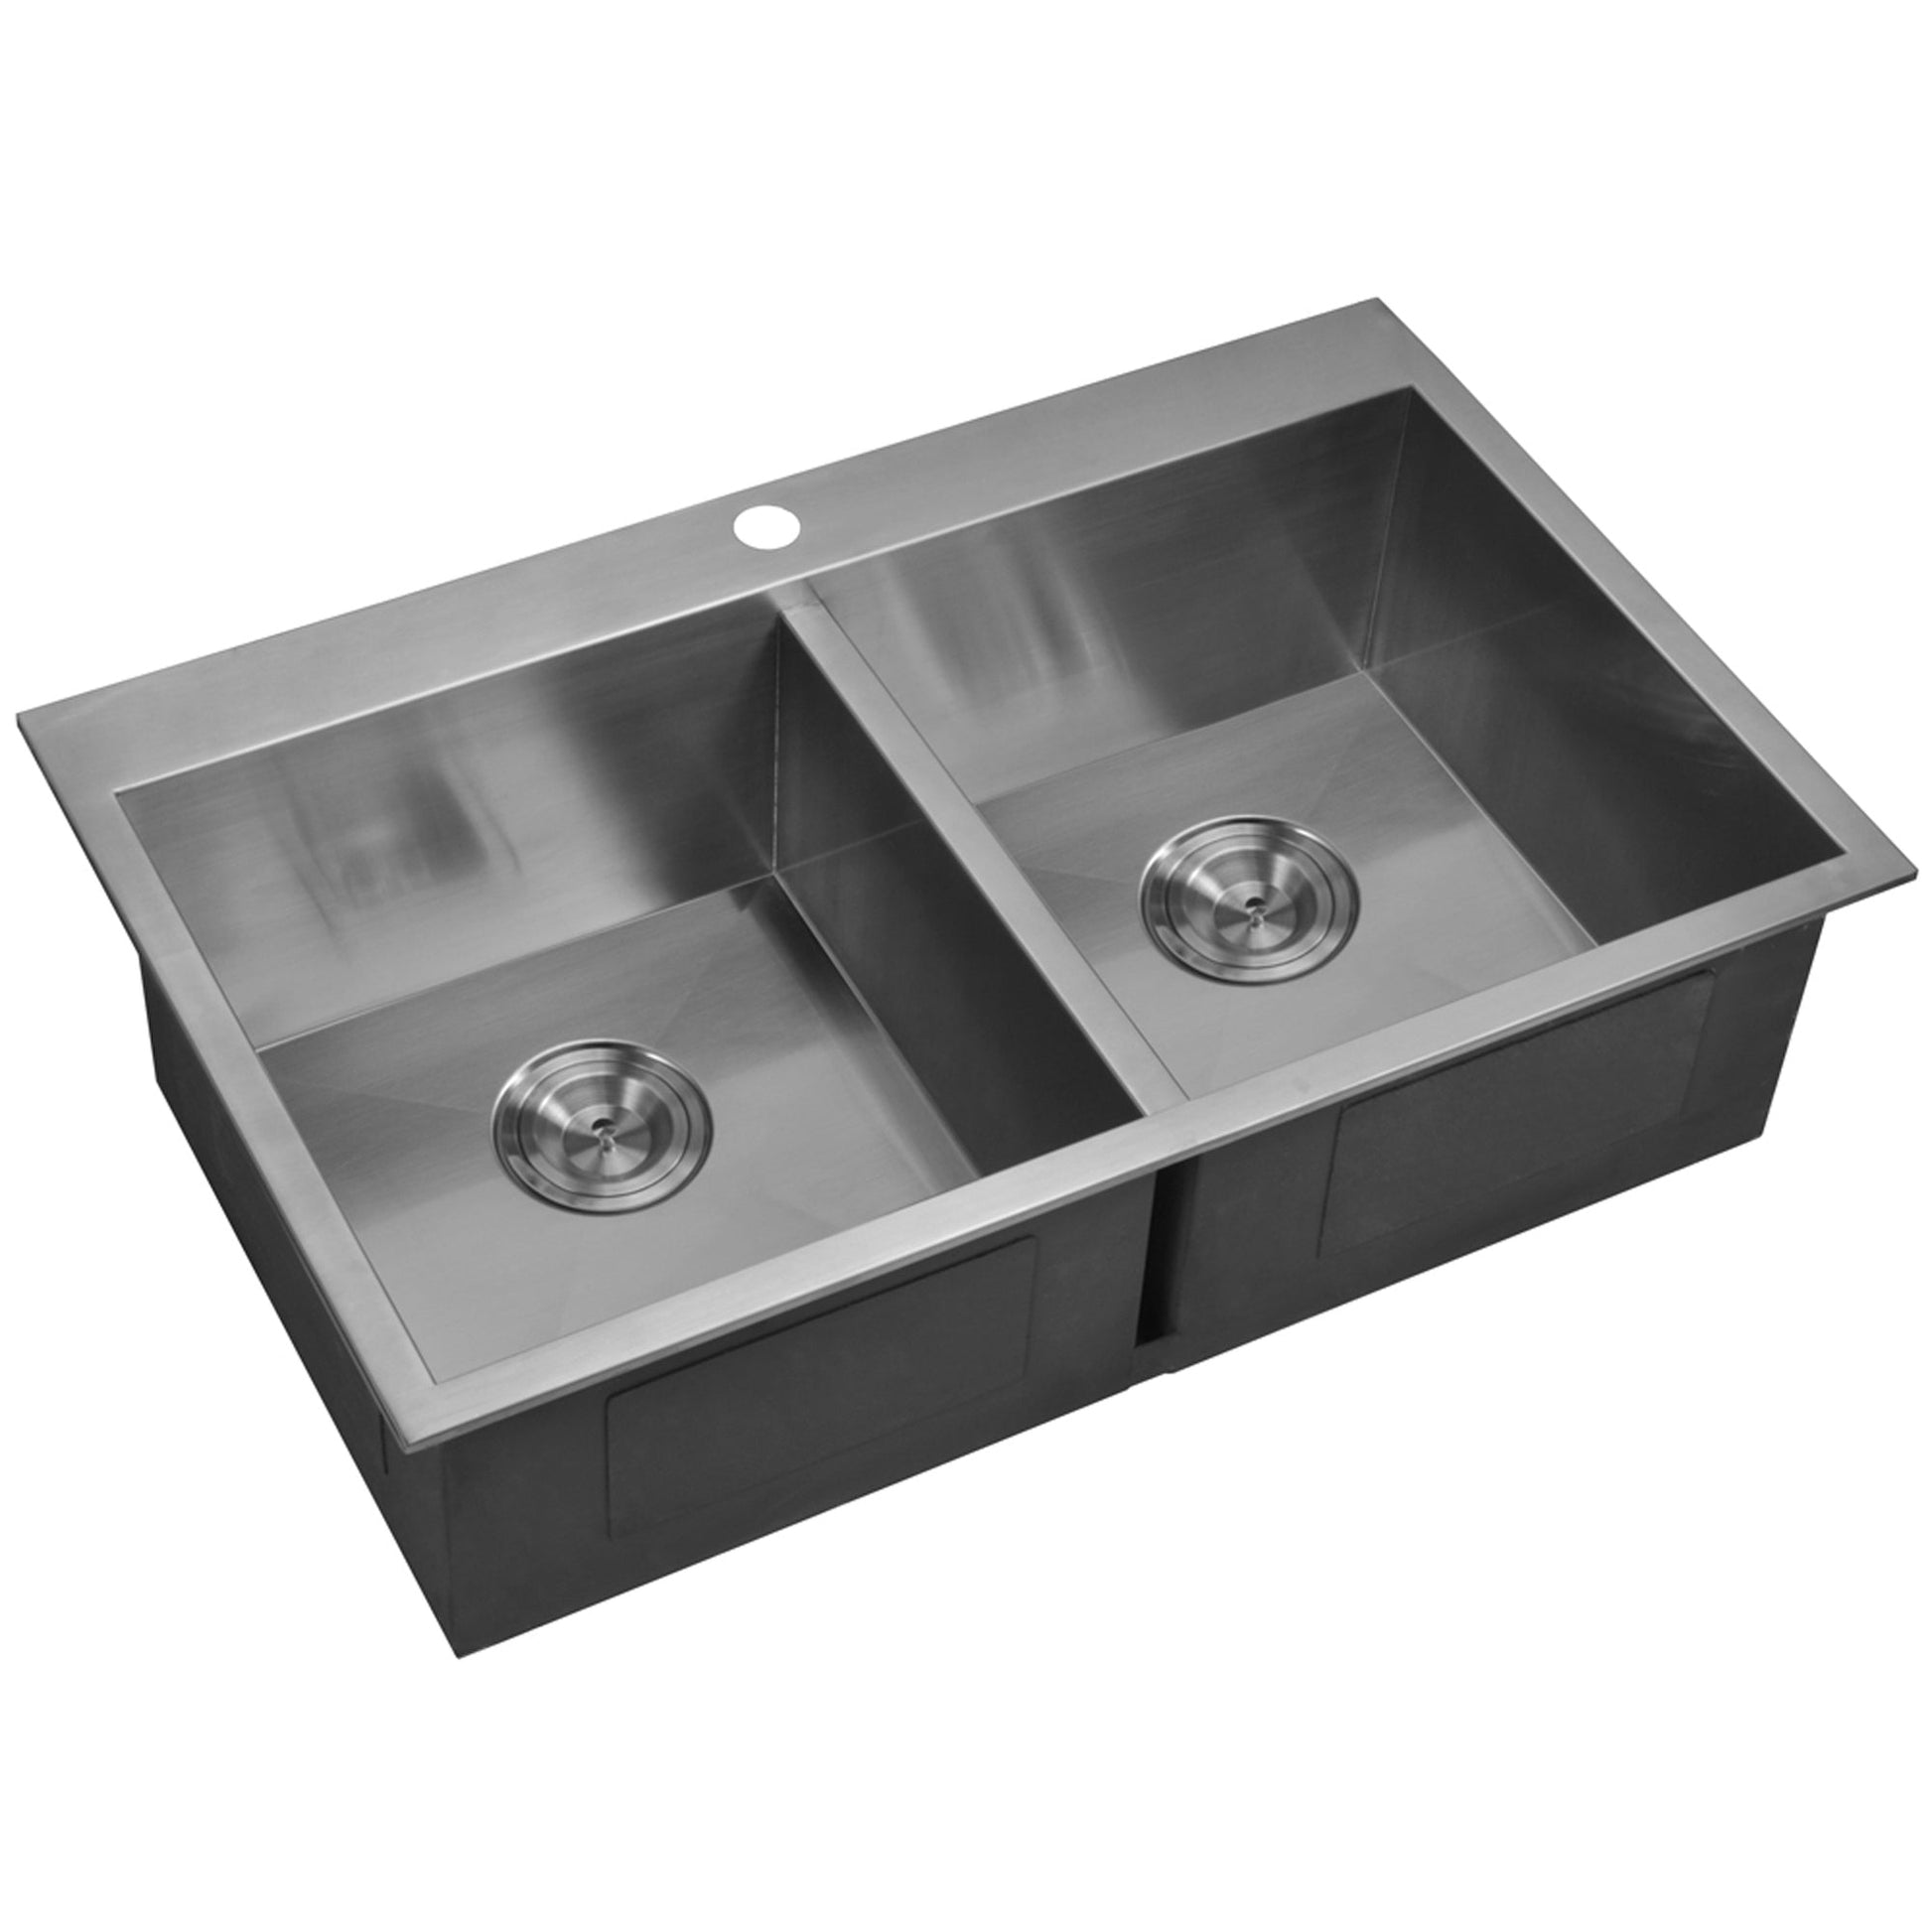 Water Creation Zero Radius 50/50 Double Bowl Stainless Steel Hand Made Drop In 33 Inch X 22 Inch Sink With Drains And Strainers